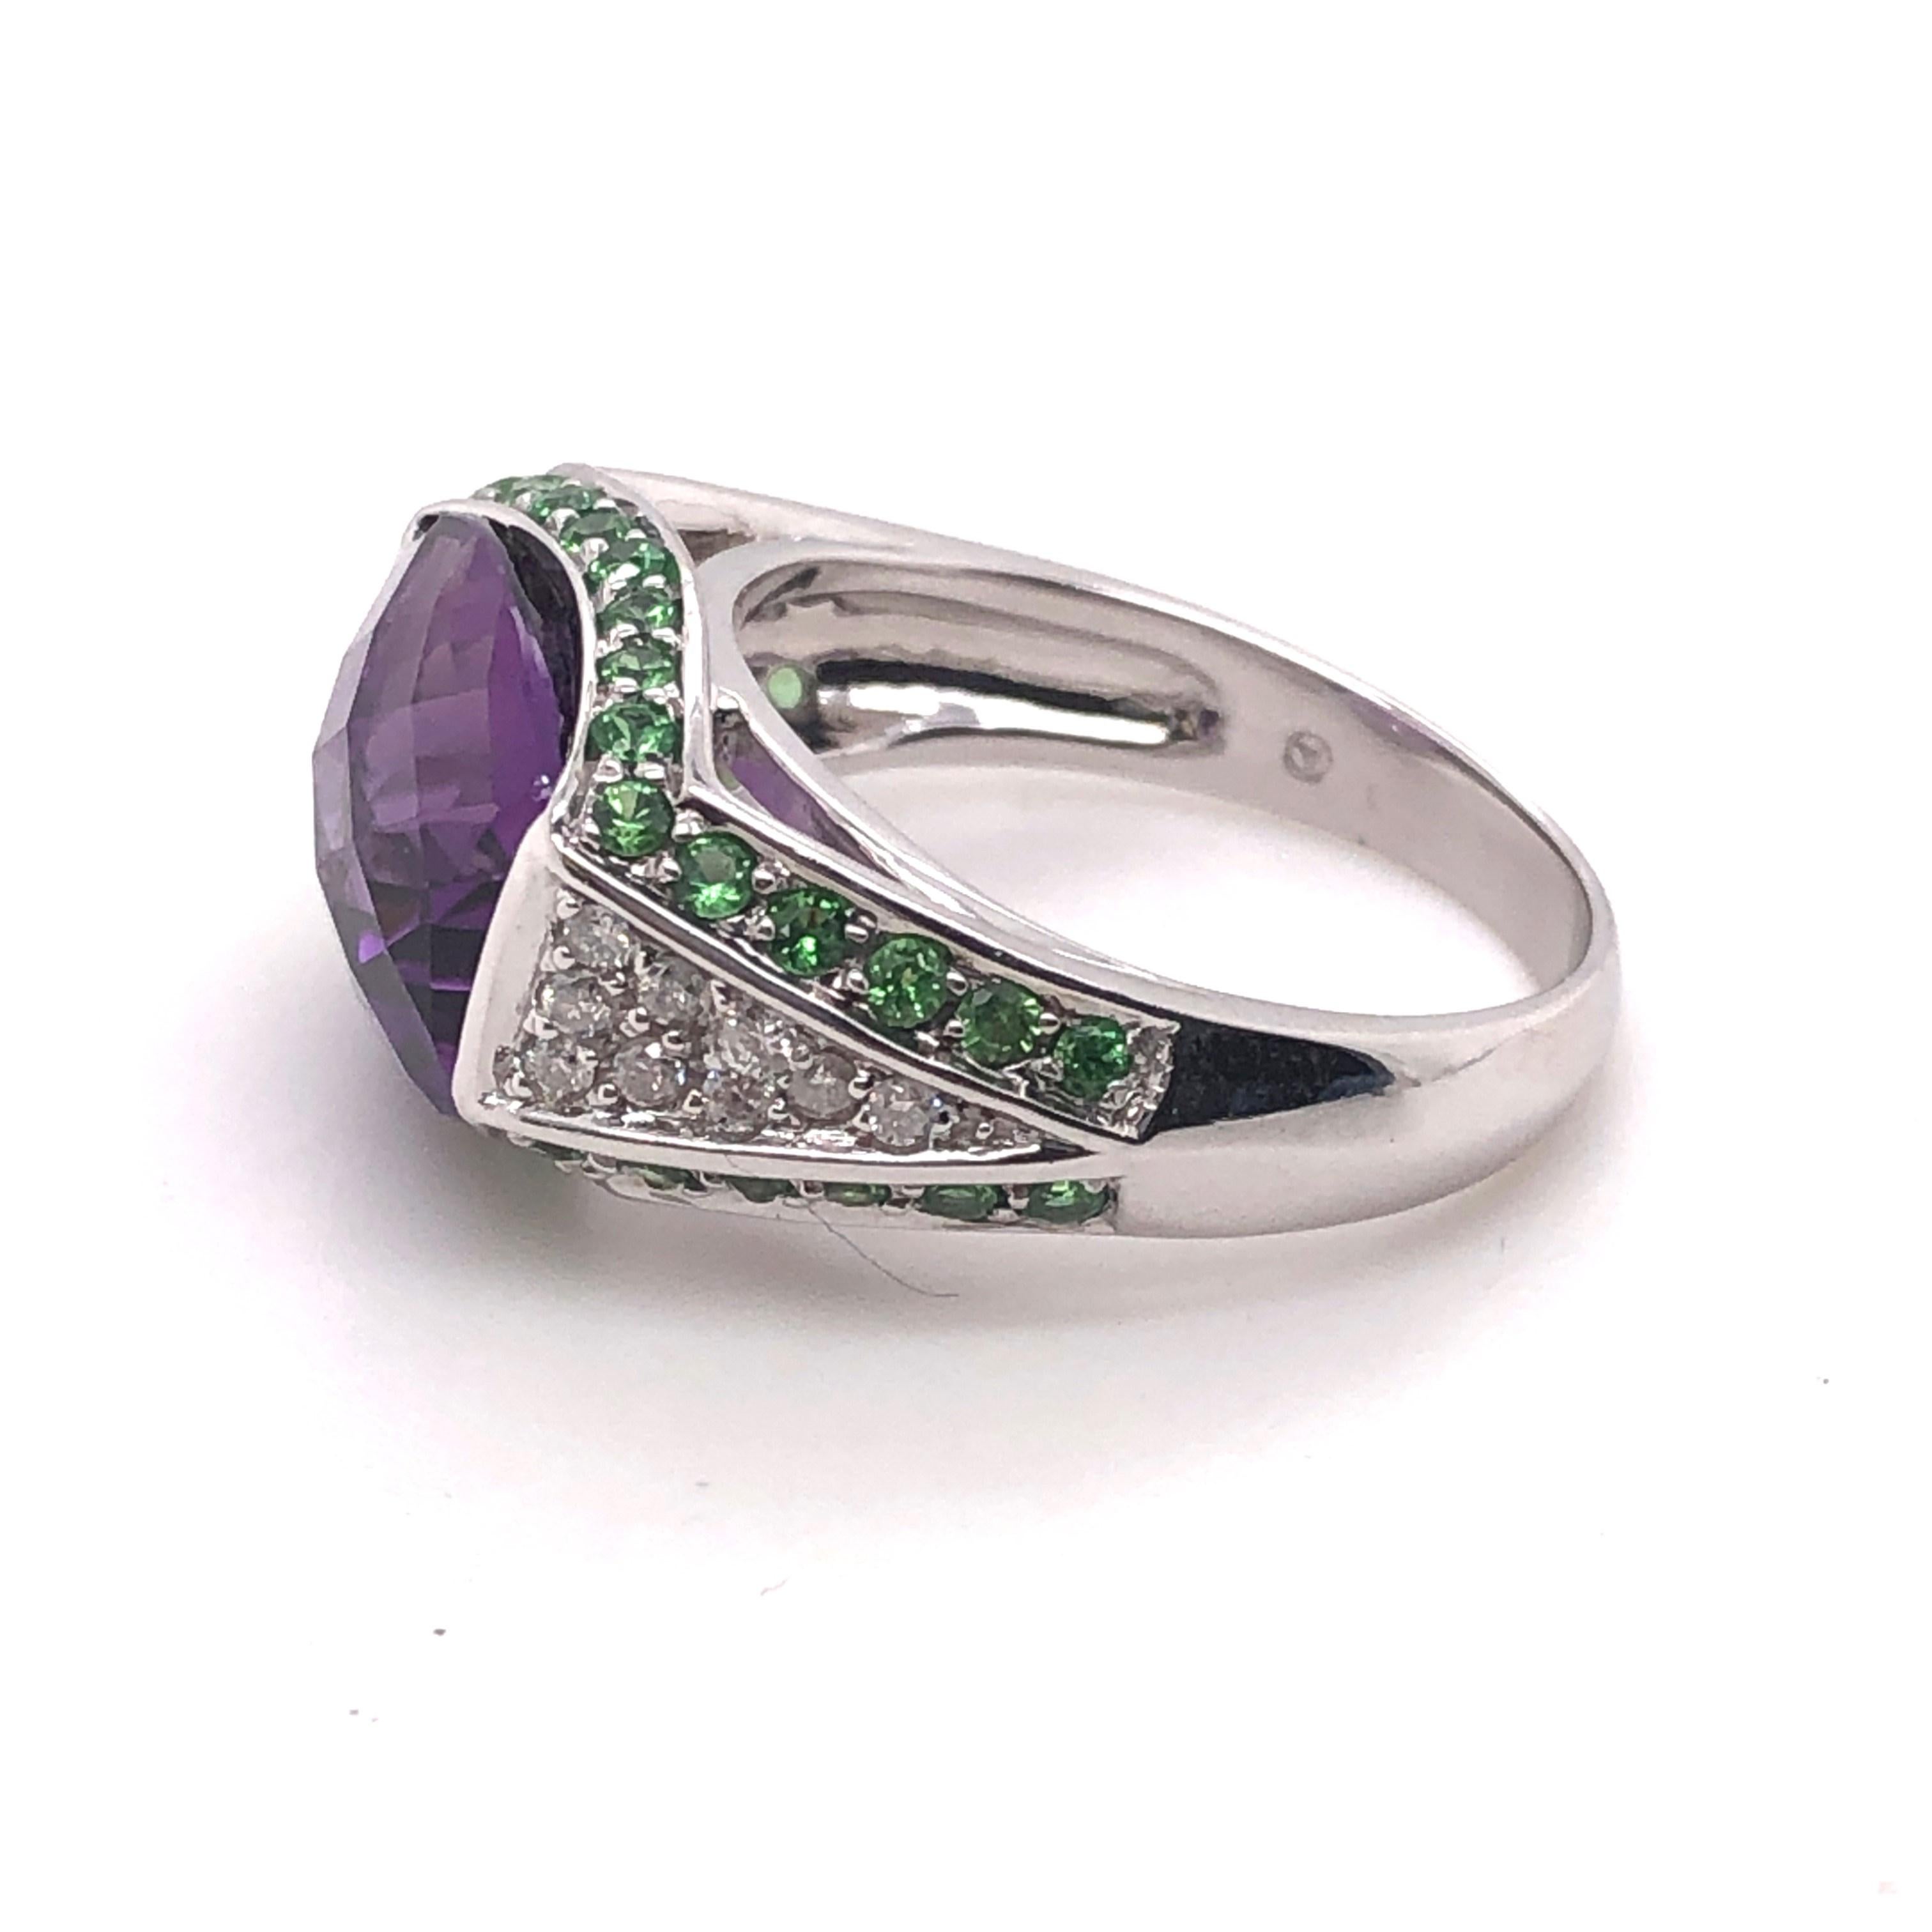 14kt white gold approximately 5.00ct antique cushion cut Amethyst with approximately .38tcw Tsavorites and .09tcw Diamond ring. This ring is a finger size 8 and can be resized. 